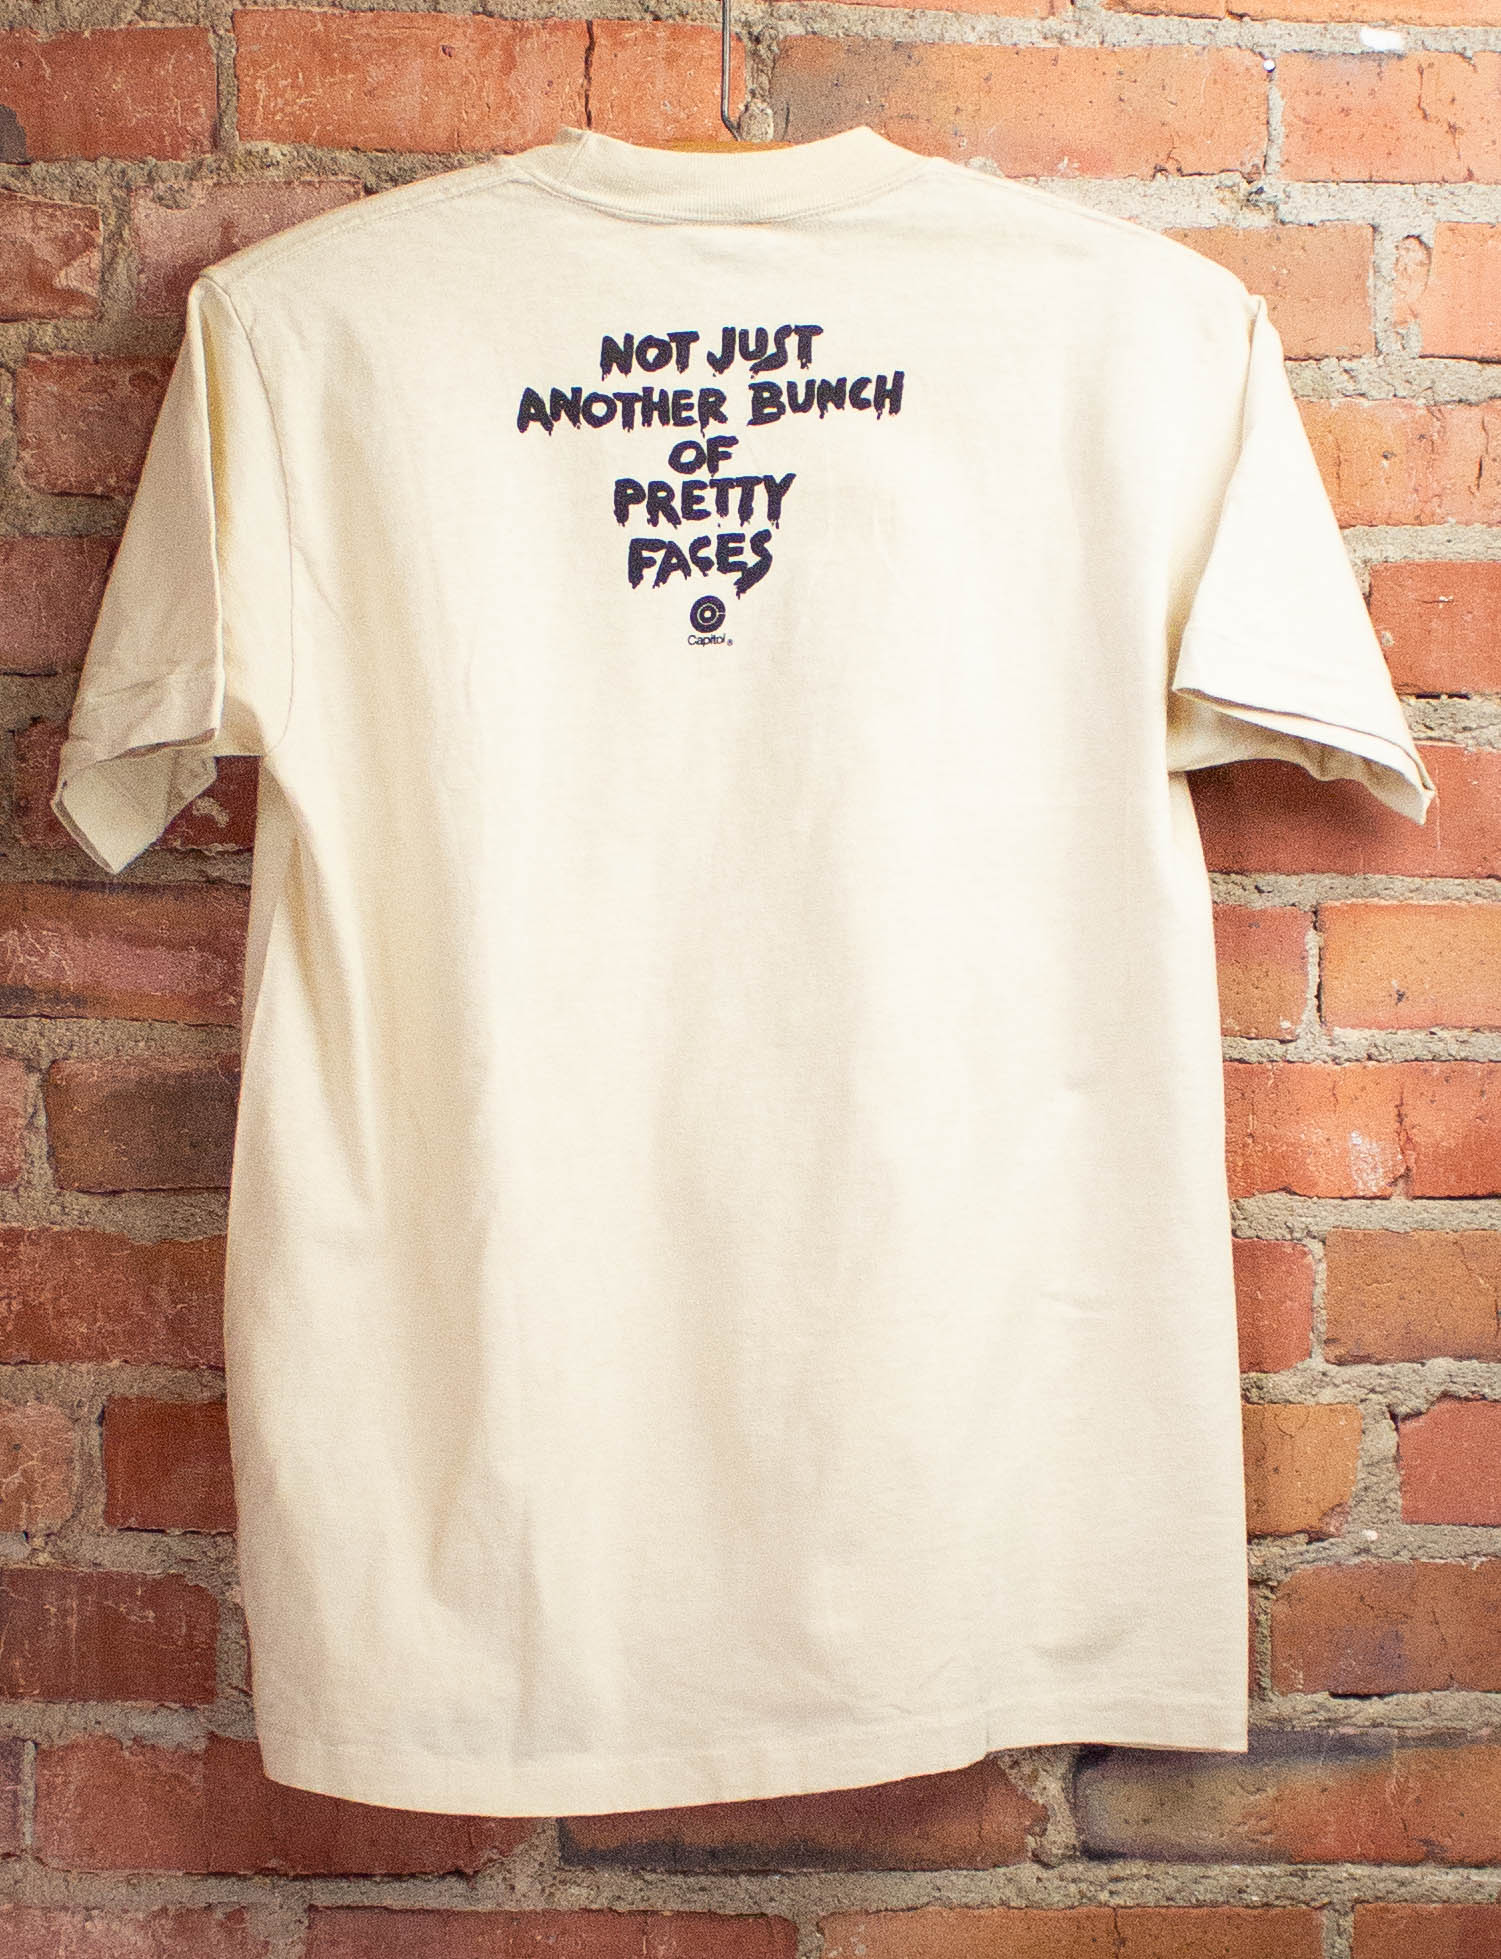 Vintage 1974 IF Not Just Pretty Faces Concert T-Shirt M